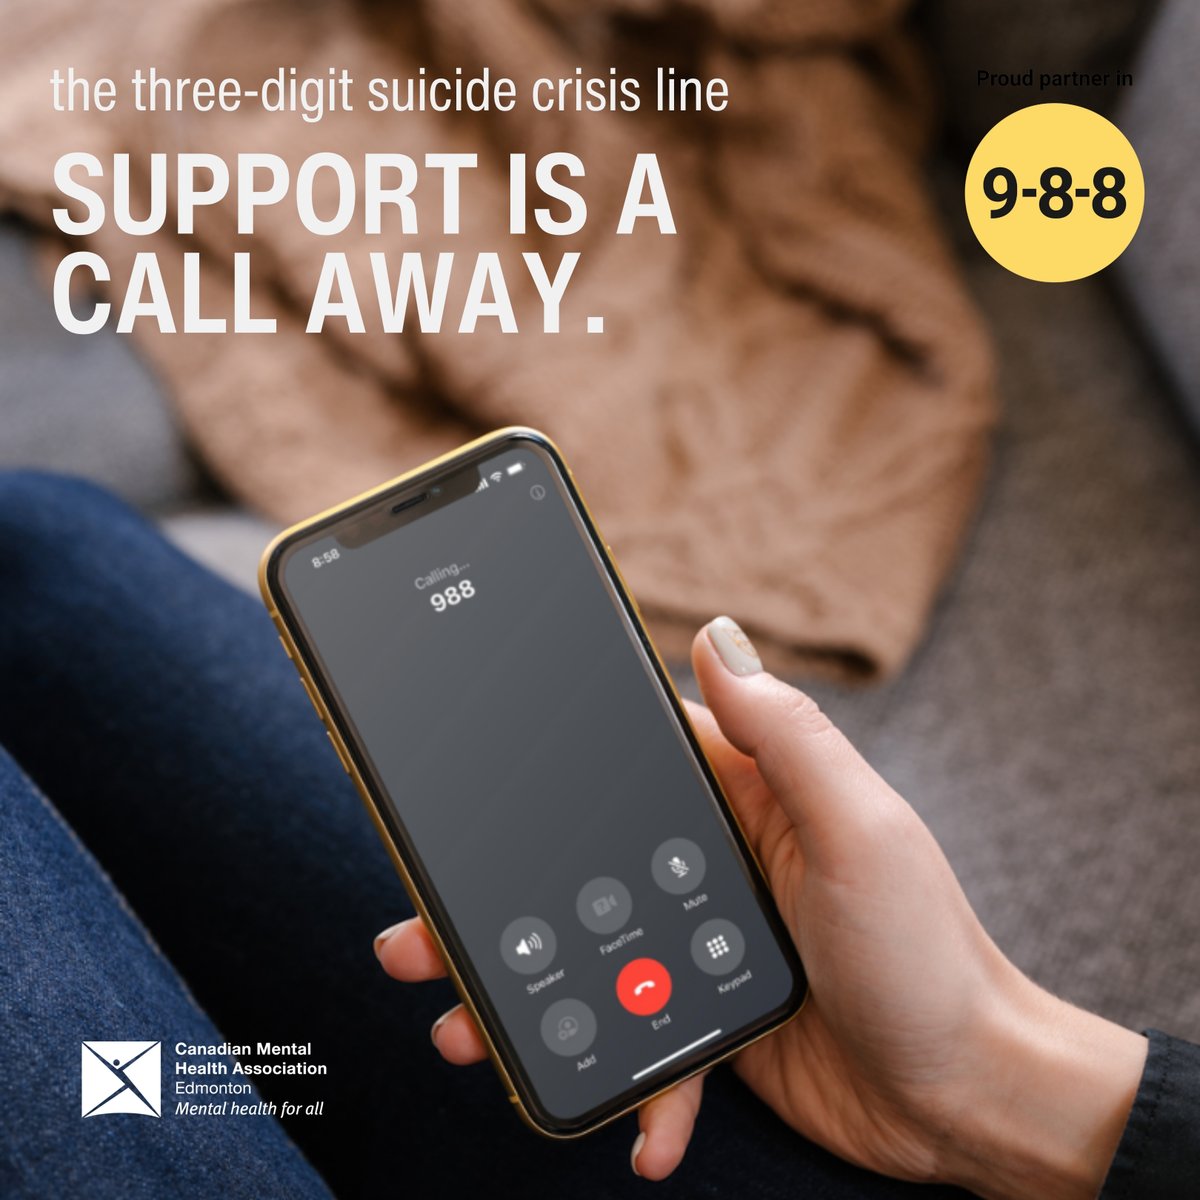 When you call 9-8-8, you'll speak to a compassionate person who is there to listen, provide guidance, and support. #cmhaedmonton #suicidecrisisline #spreadtheword #freementalhealthresources